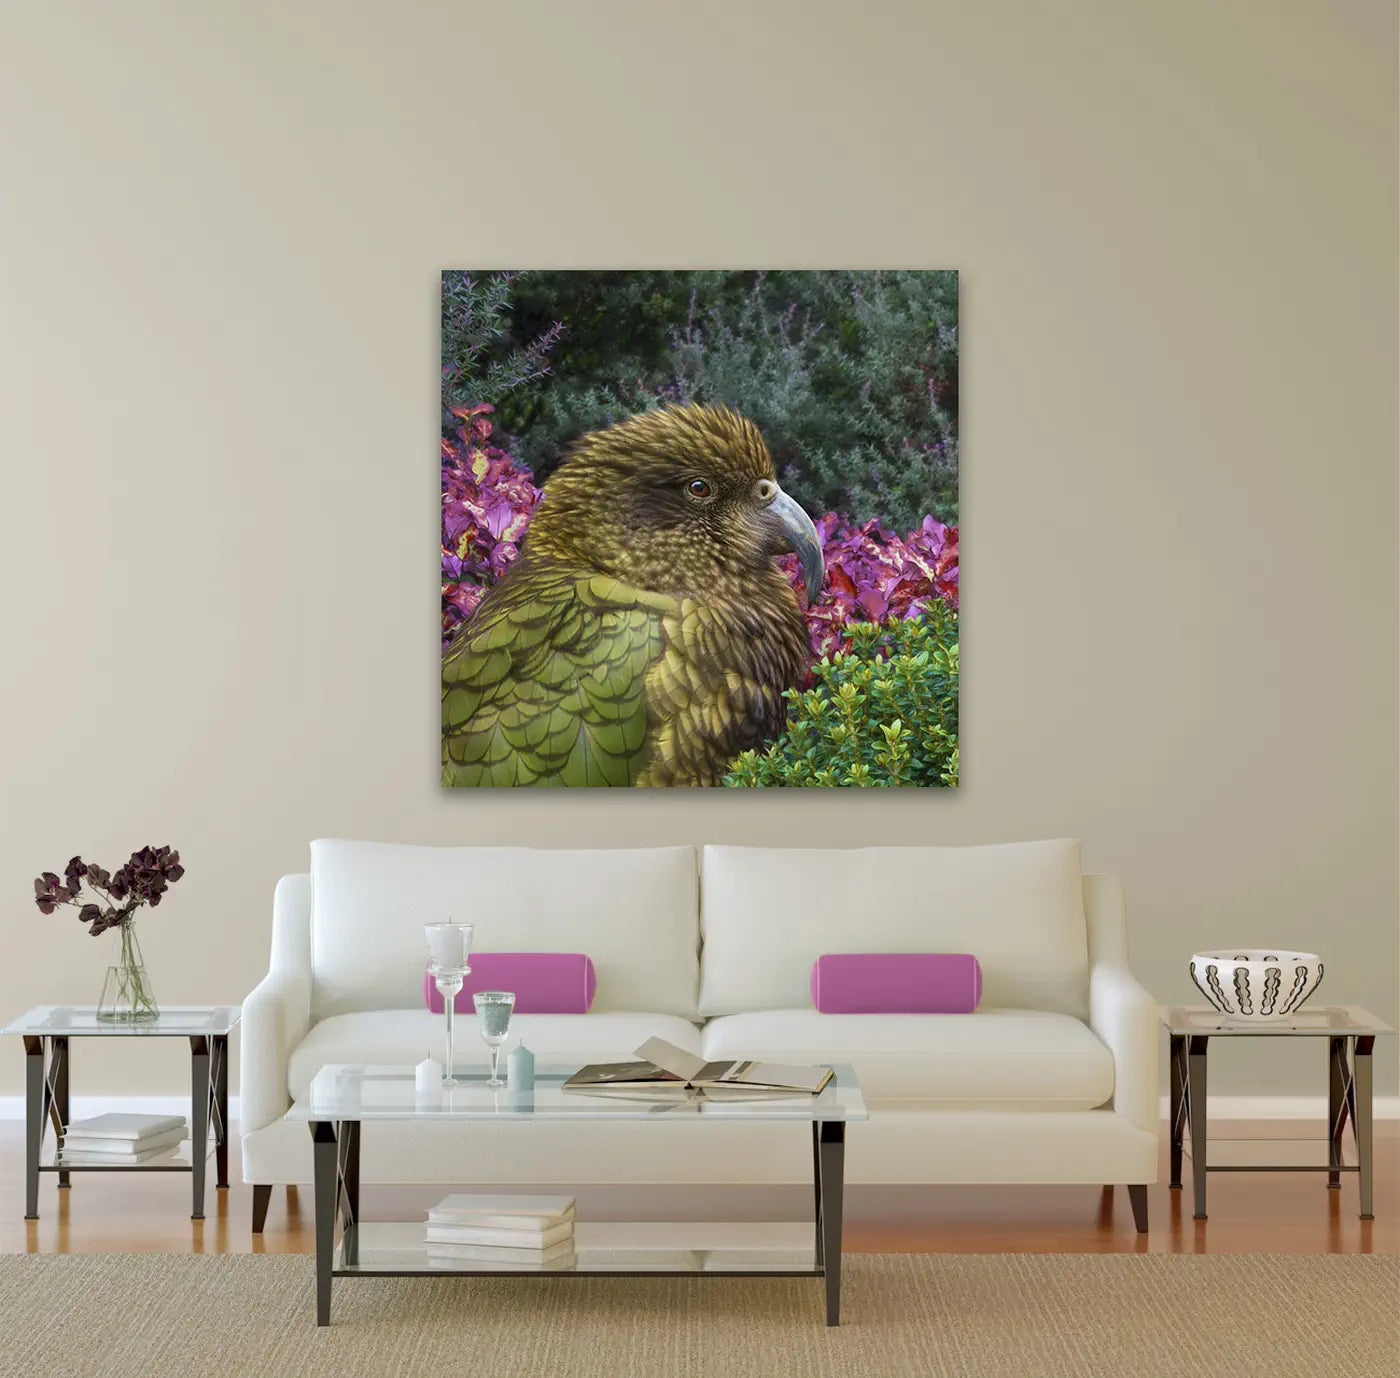 Living room with sofa and artwork of a kea